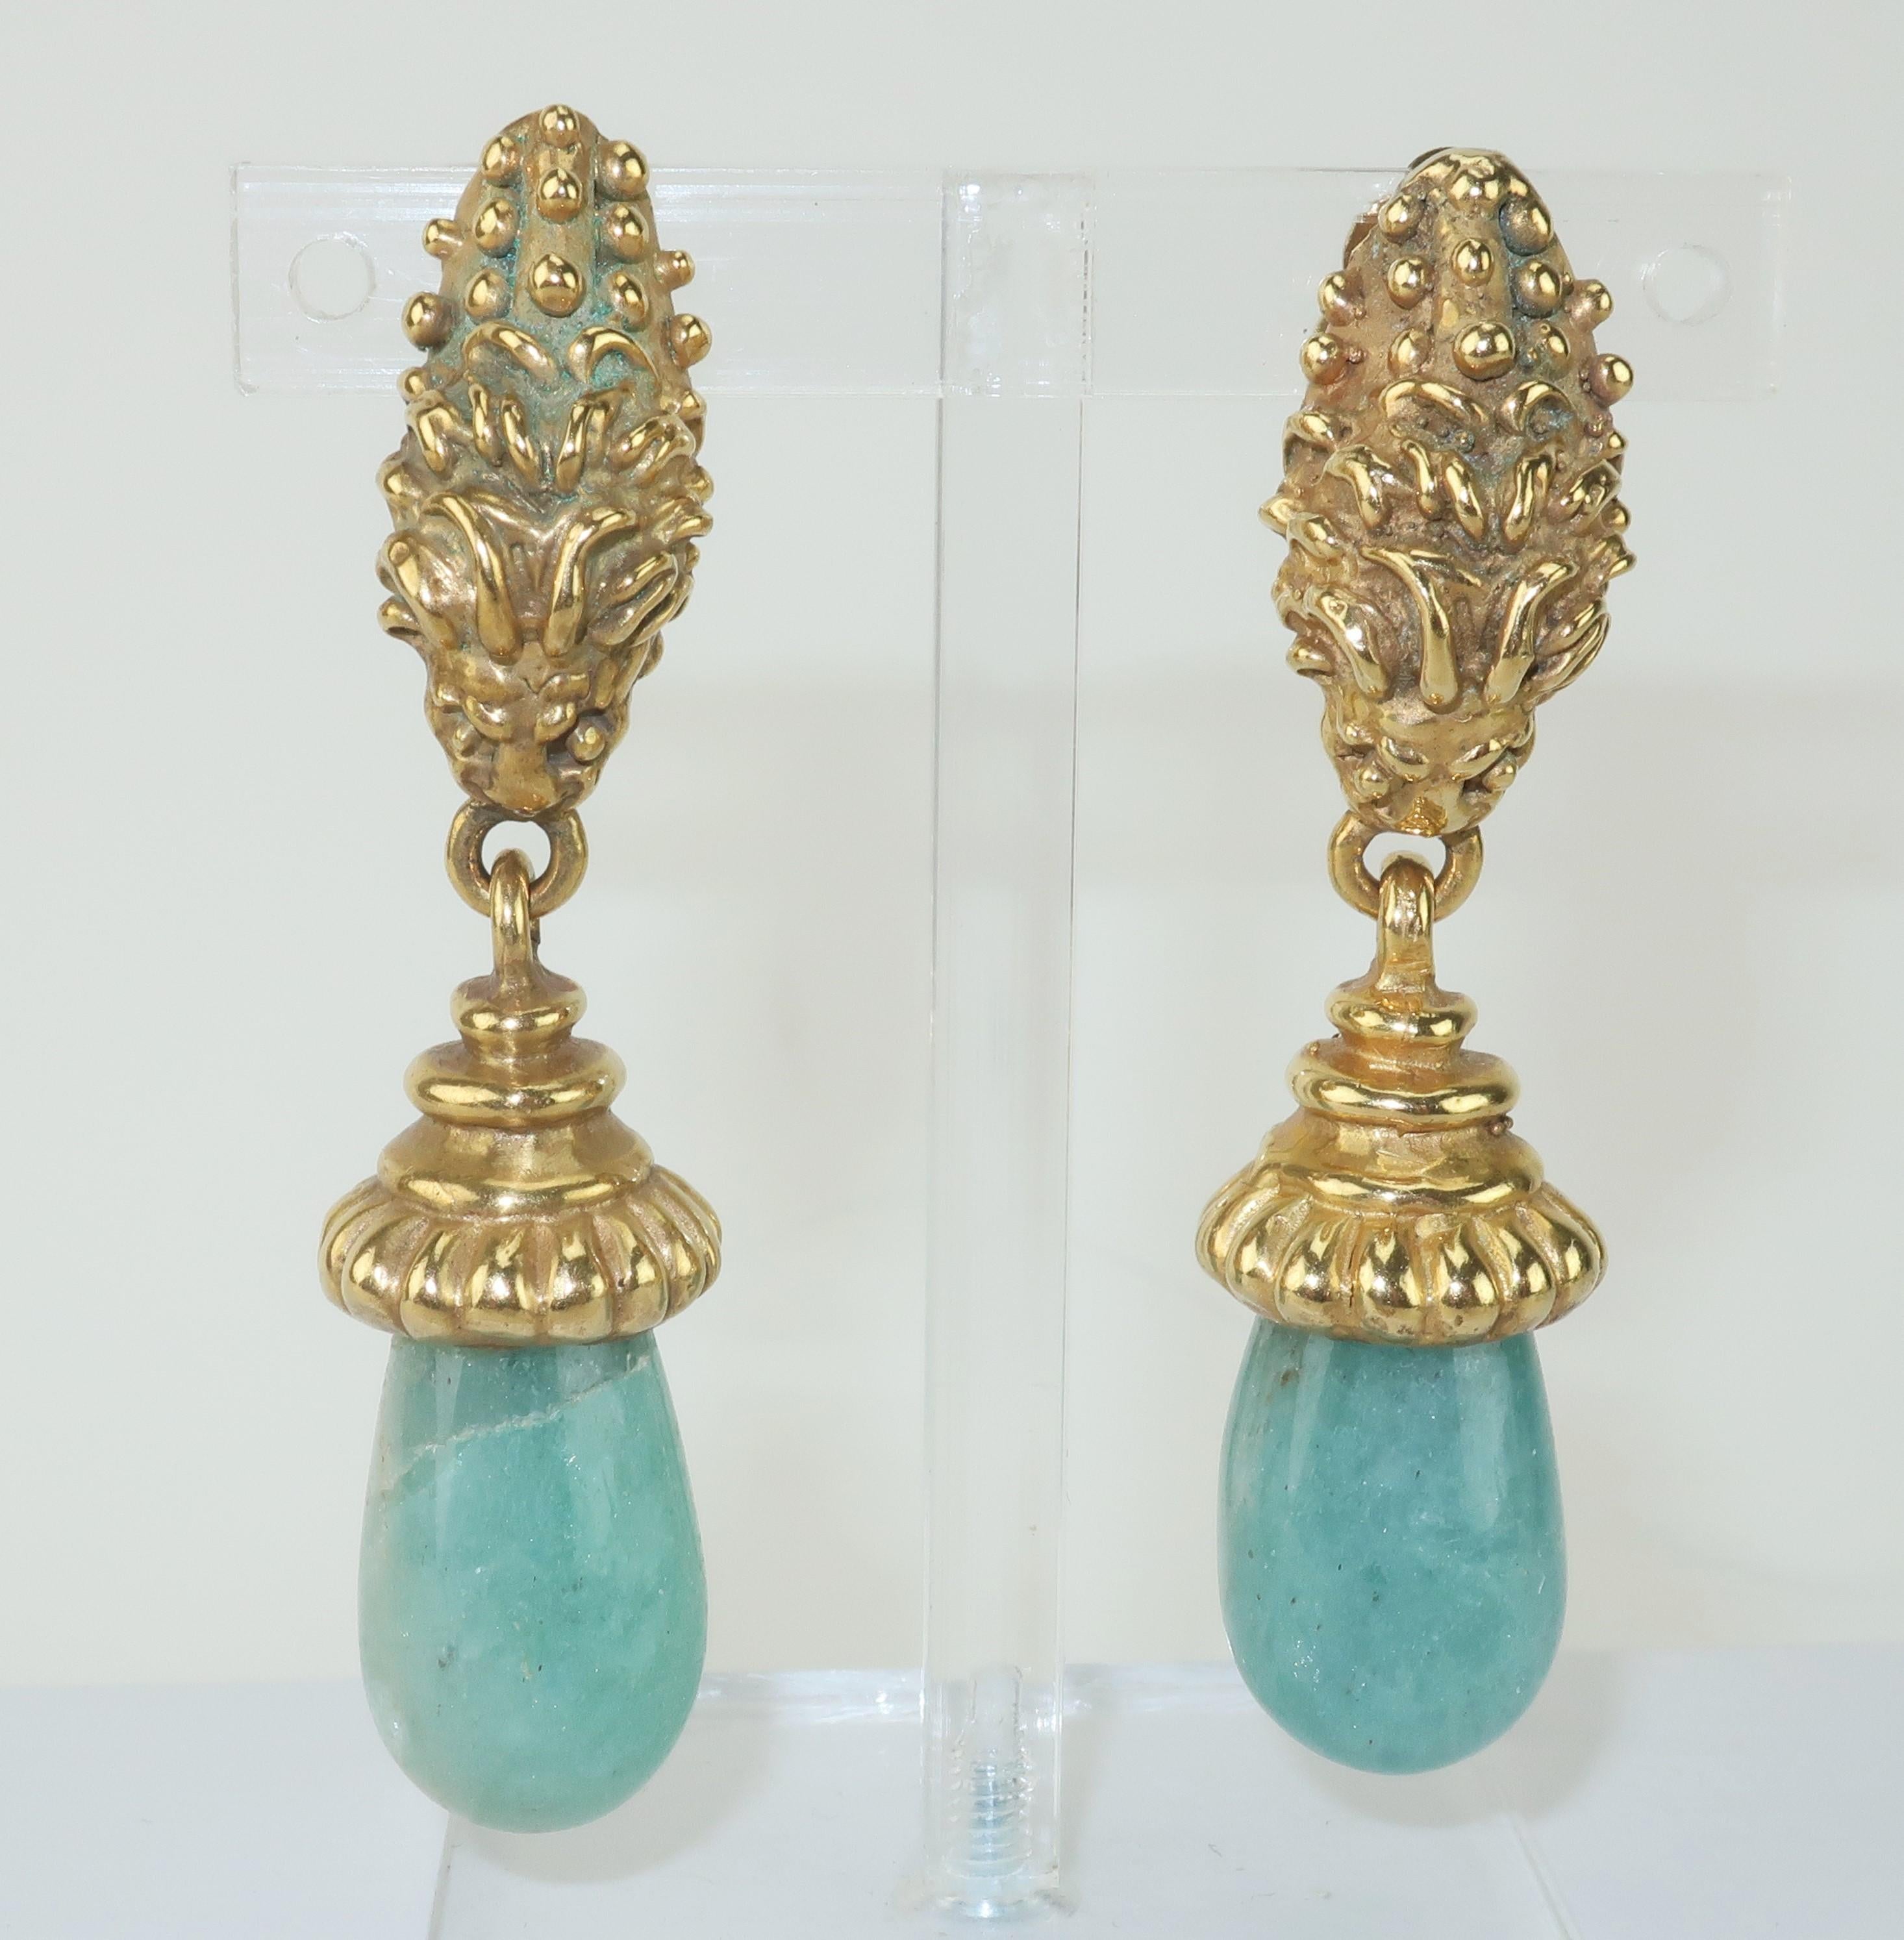 1980’s brass and sea foam green agate clip on earrings.  The brass base is in the highly detailed form of a foo dog or lion suspending a teardrop shaped agate dangle.  No hallmarks though beautiful made with quality details. 
CONDITION
Very good